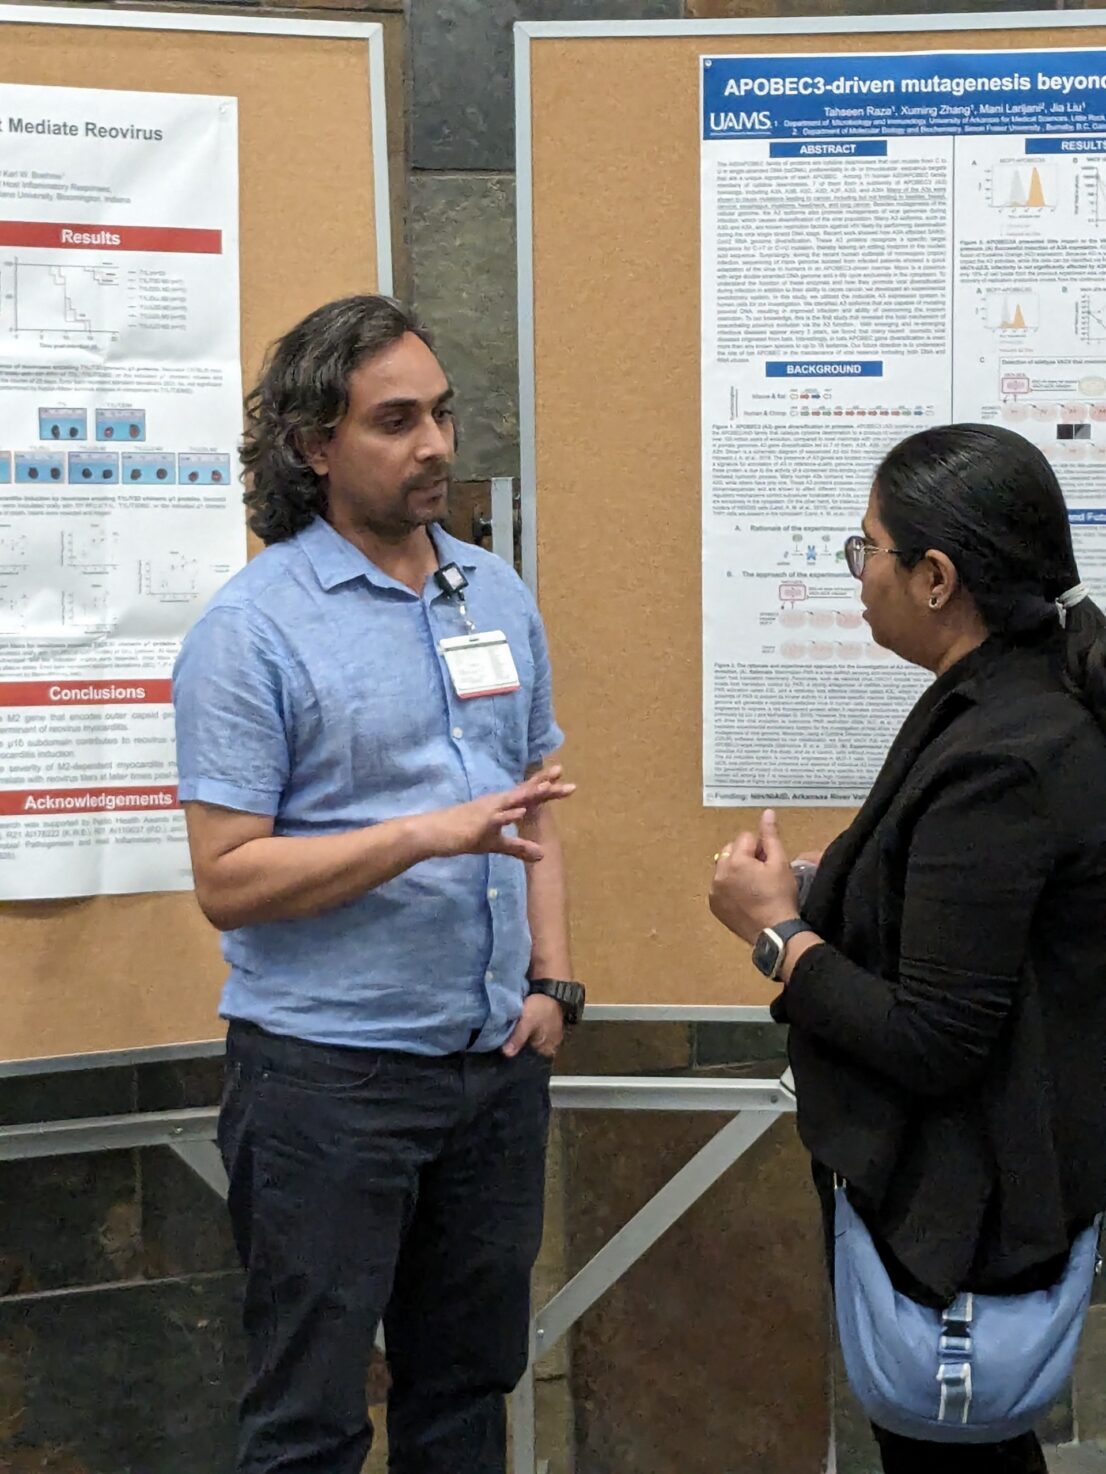 Discussion of a poster by 2 faculty